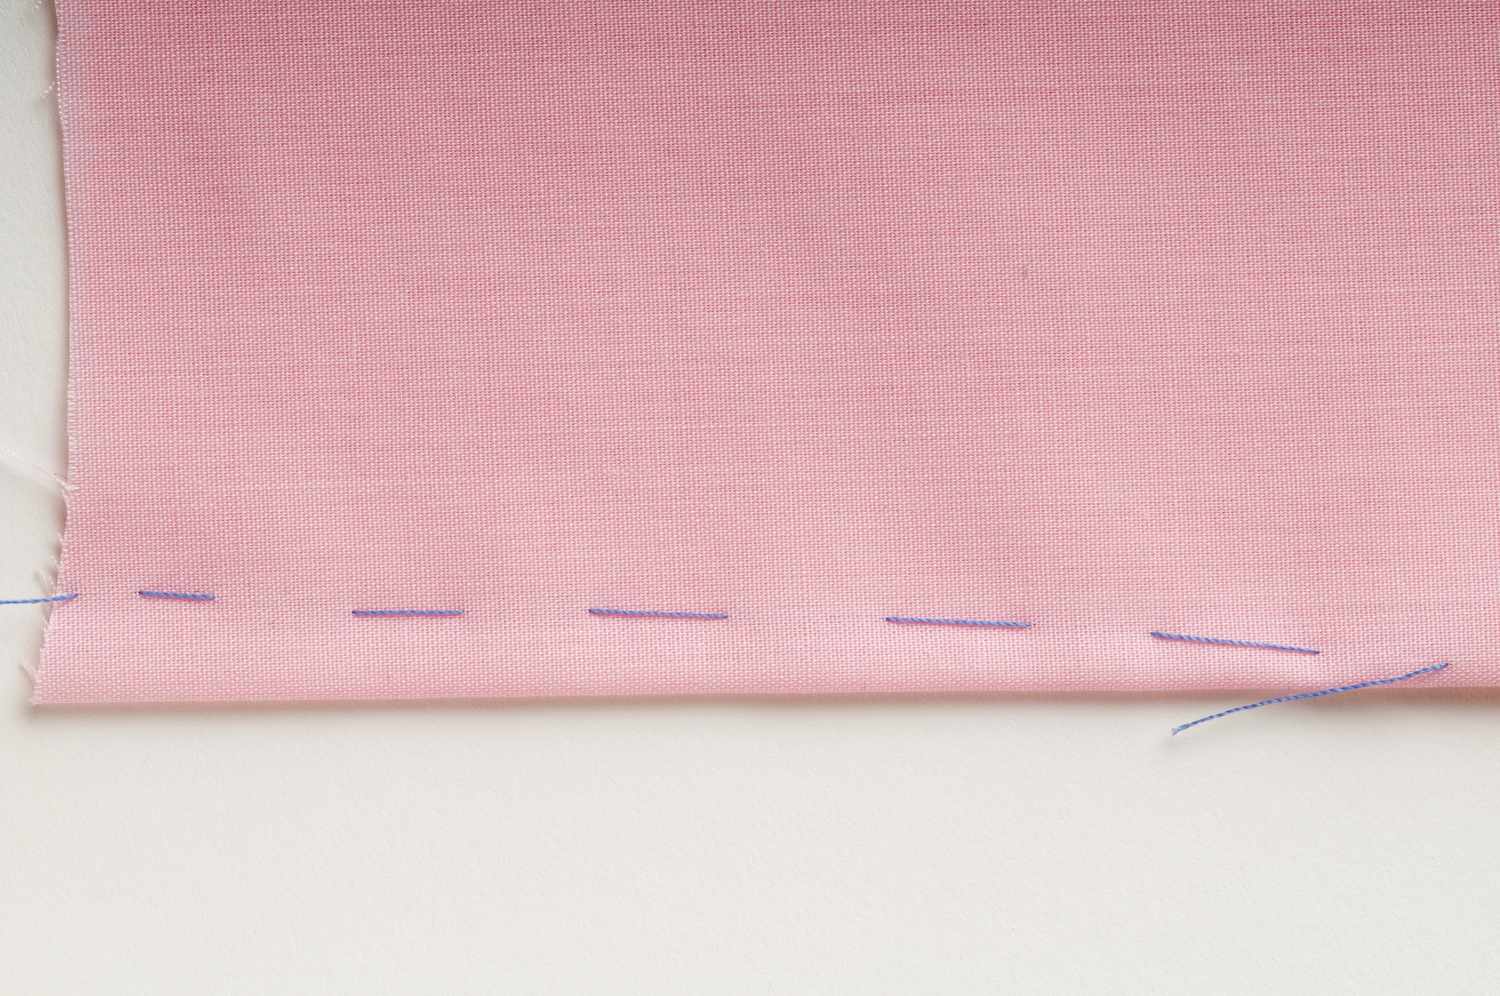 Dart marked out with basting stitch, on pink fabric, close up